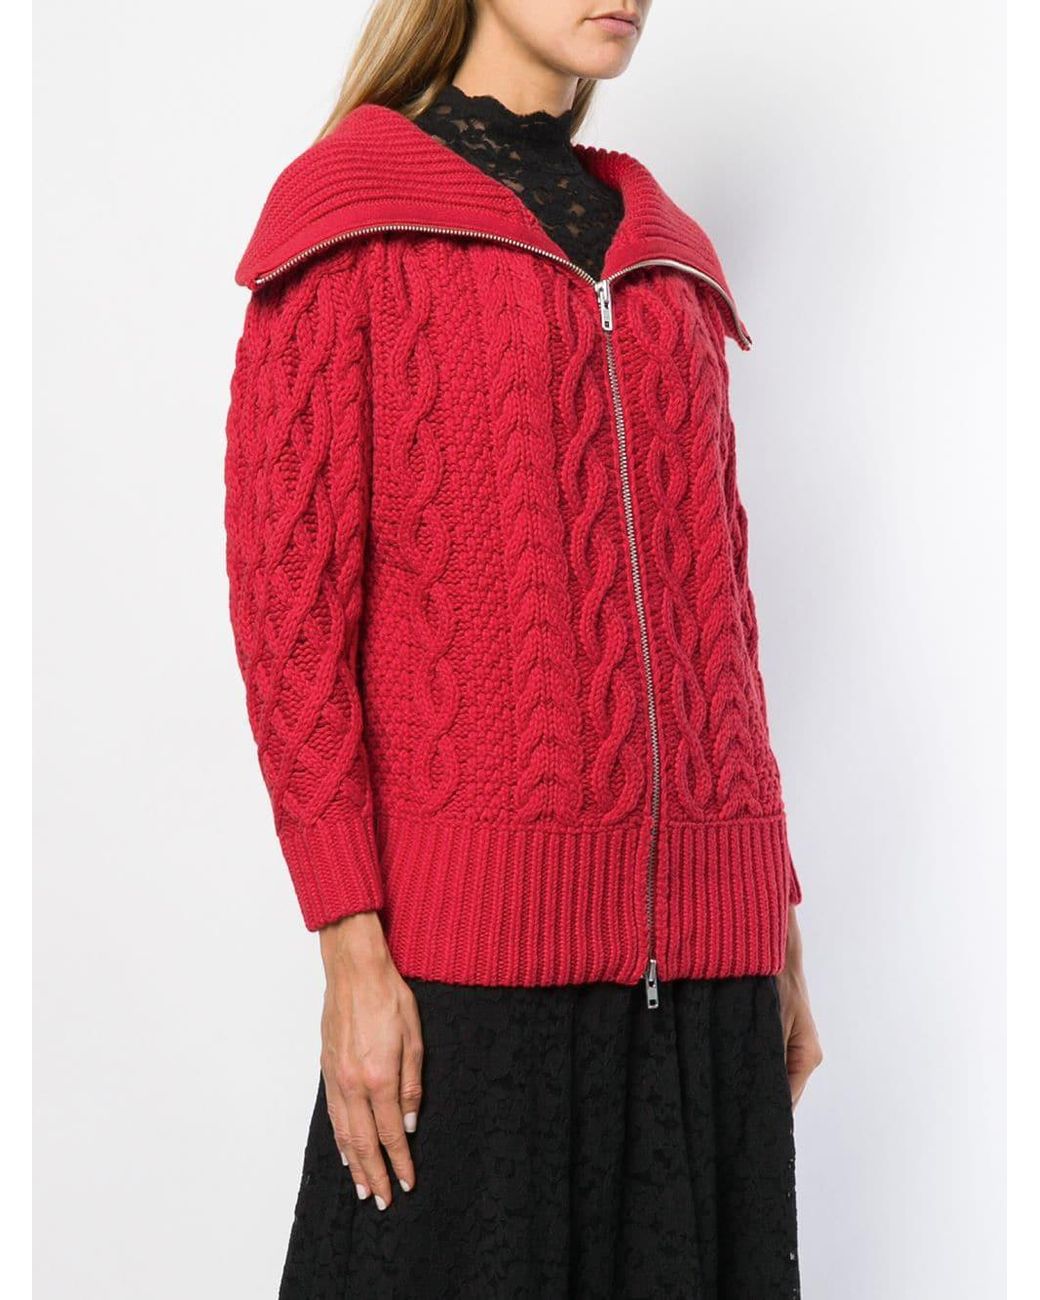 Self-Portrait Cable-knit Cardigan in Red | Lyst